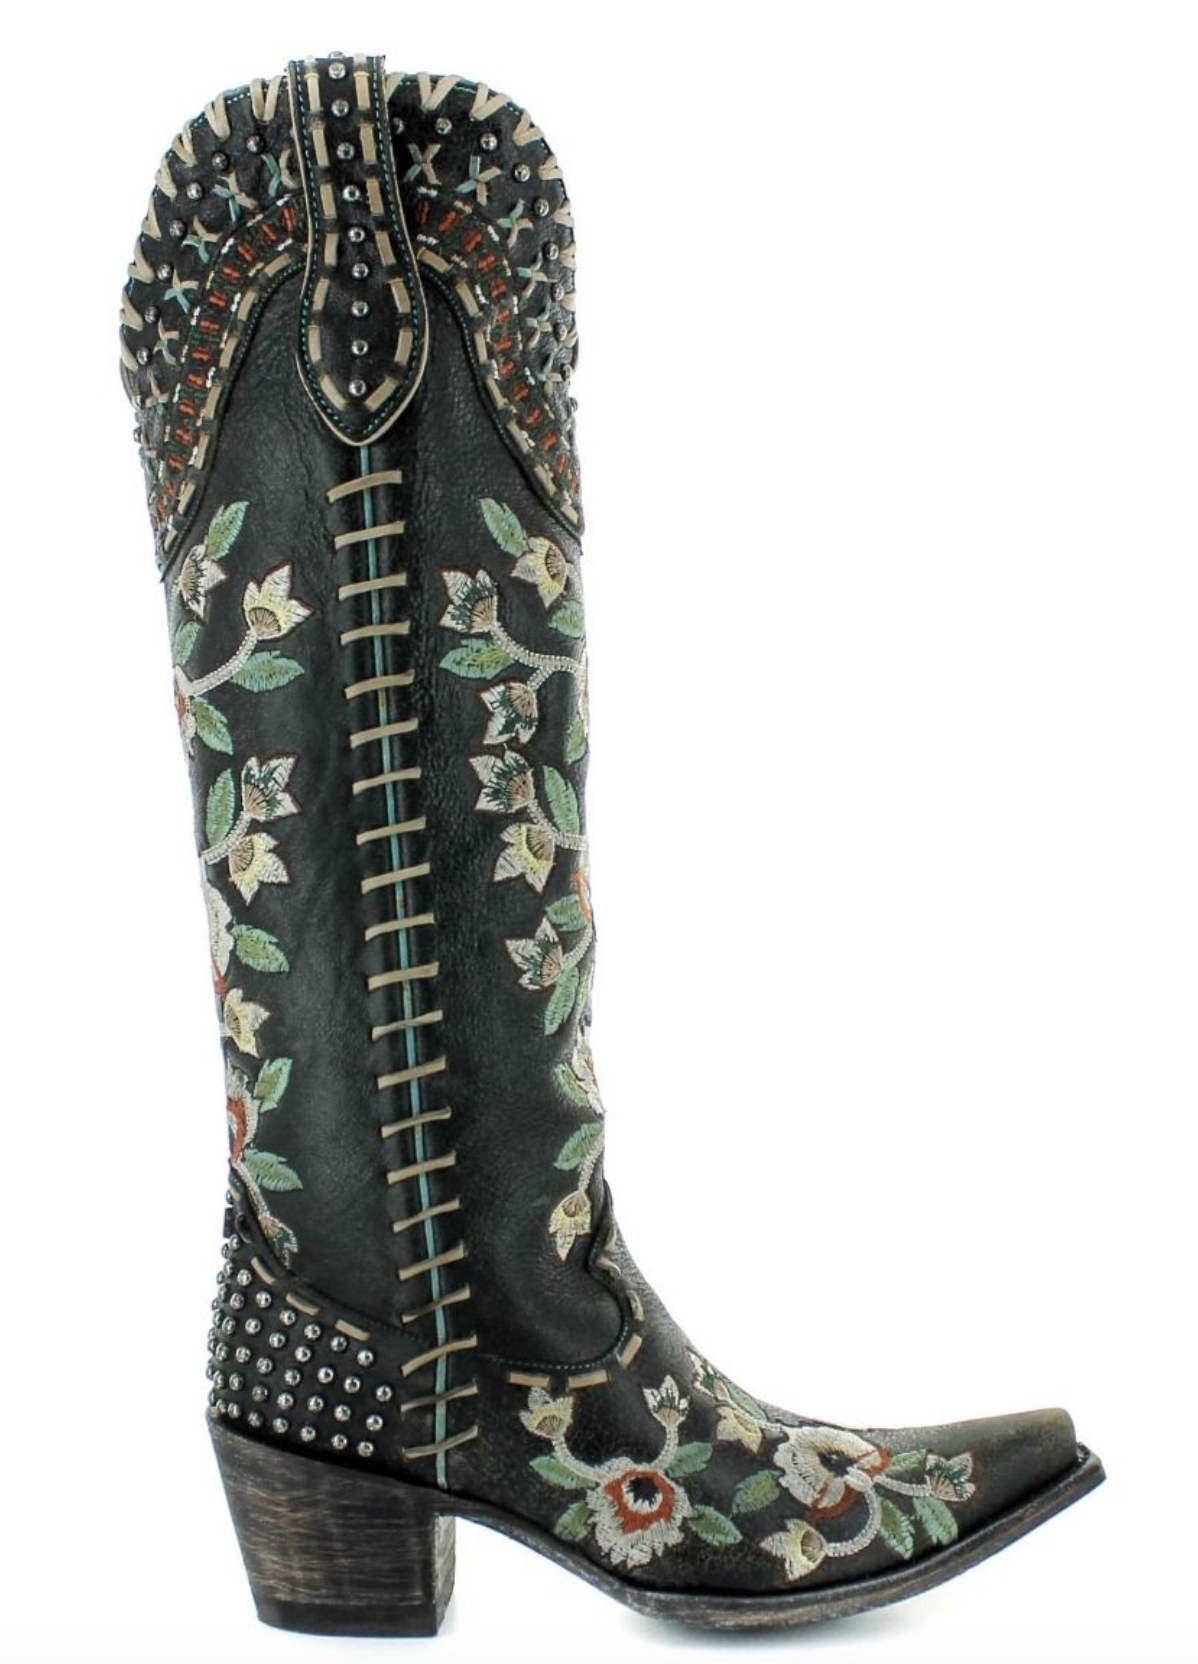 WOMEN'S ALMOST FAMOUS 17IN BLACK BOOTS